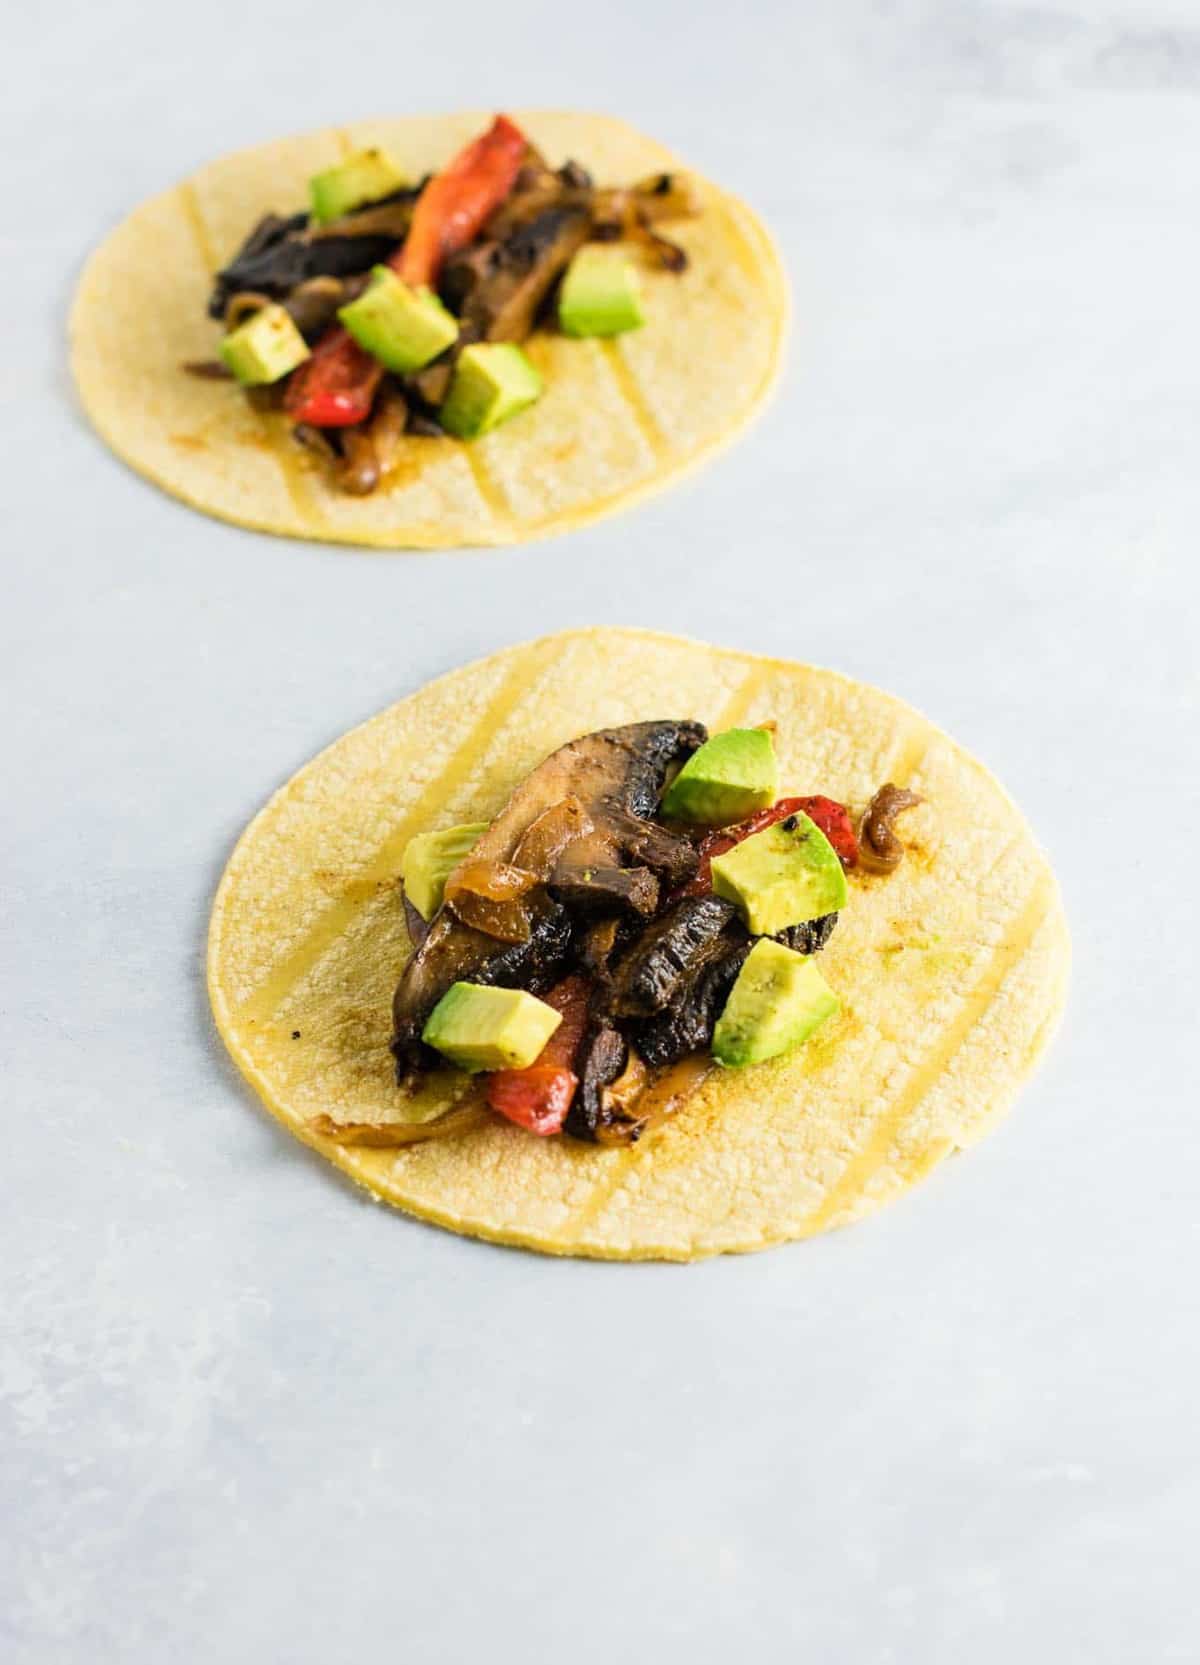 Easy 30 minute vegan Portobello fajitas made with meaty Portobello slices and roasted bell pepper and onion. A healthy and delicious dinner ready in just half an hour! #vegan #portobello #portobellofajitas #glutenfree #dinner #glutenfreevegan #veganfajitas